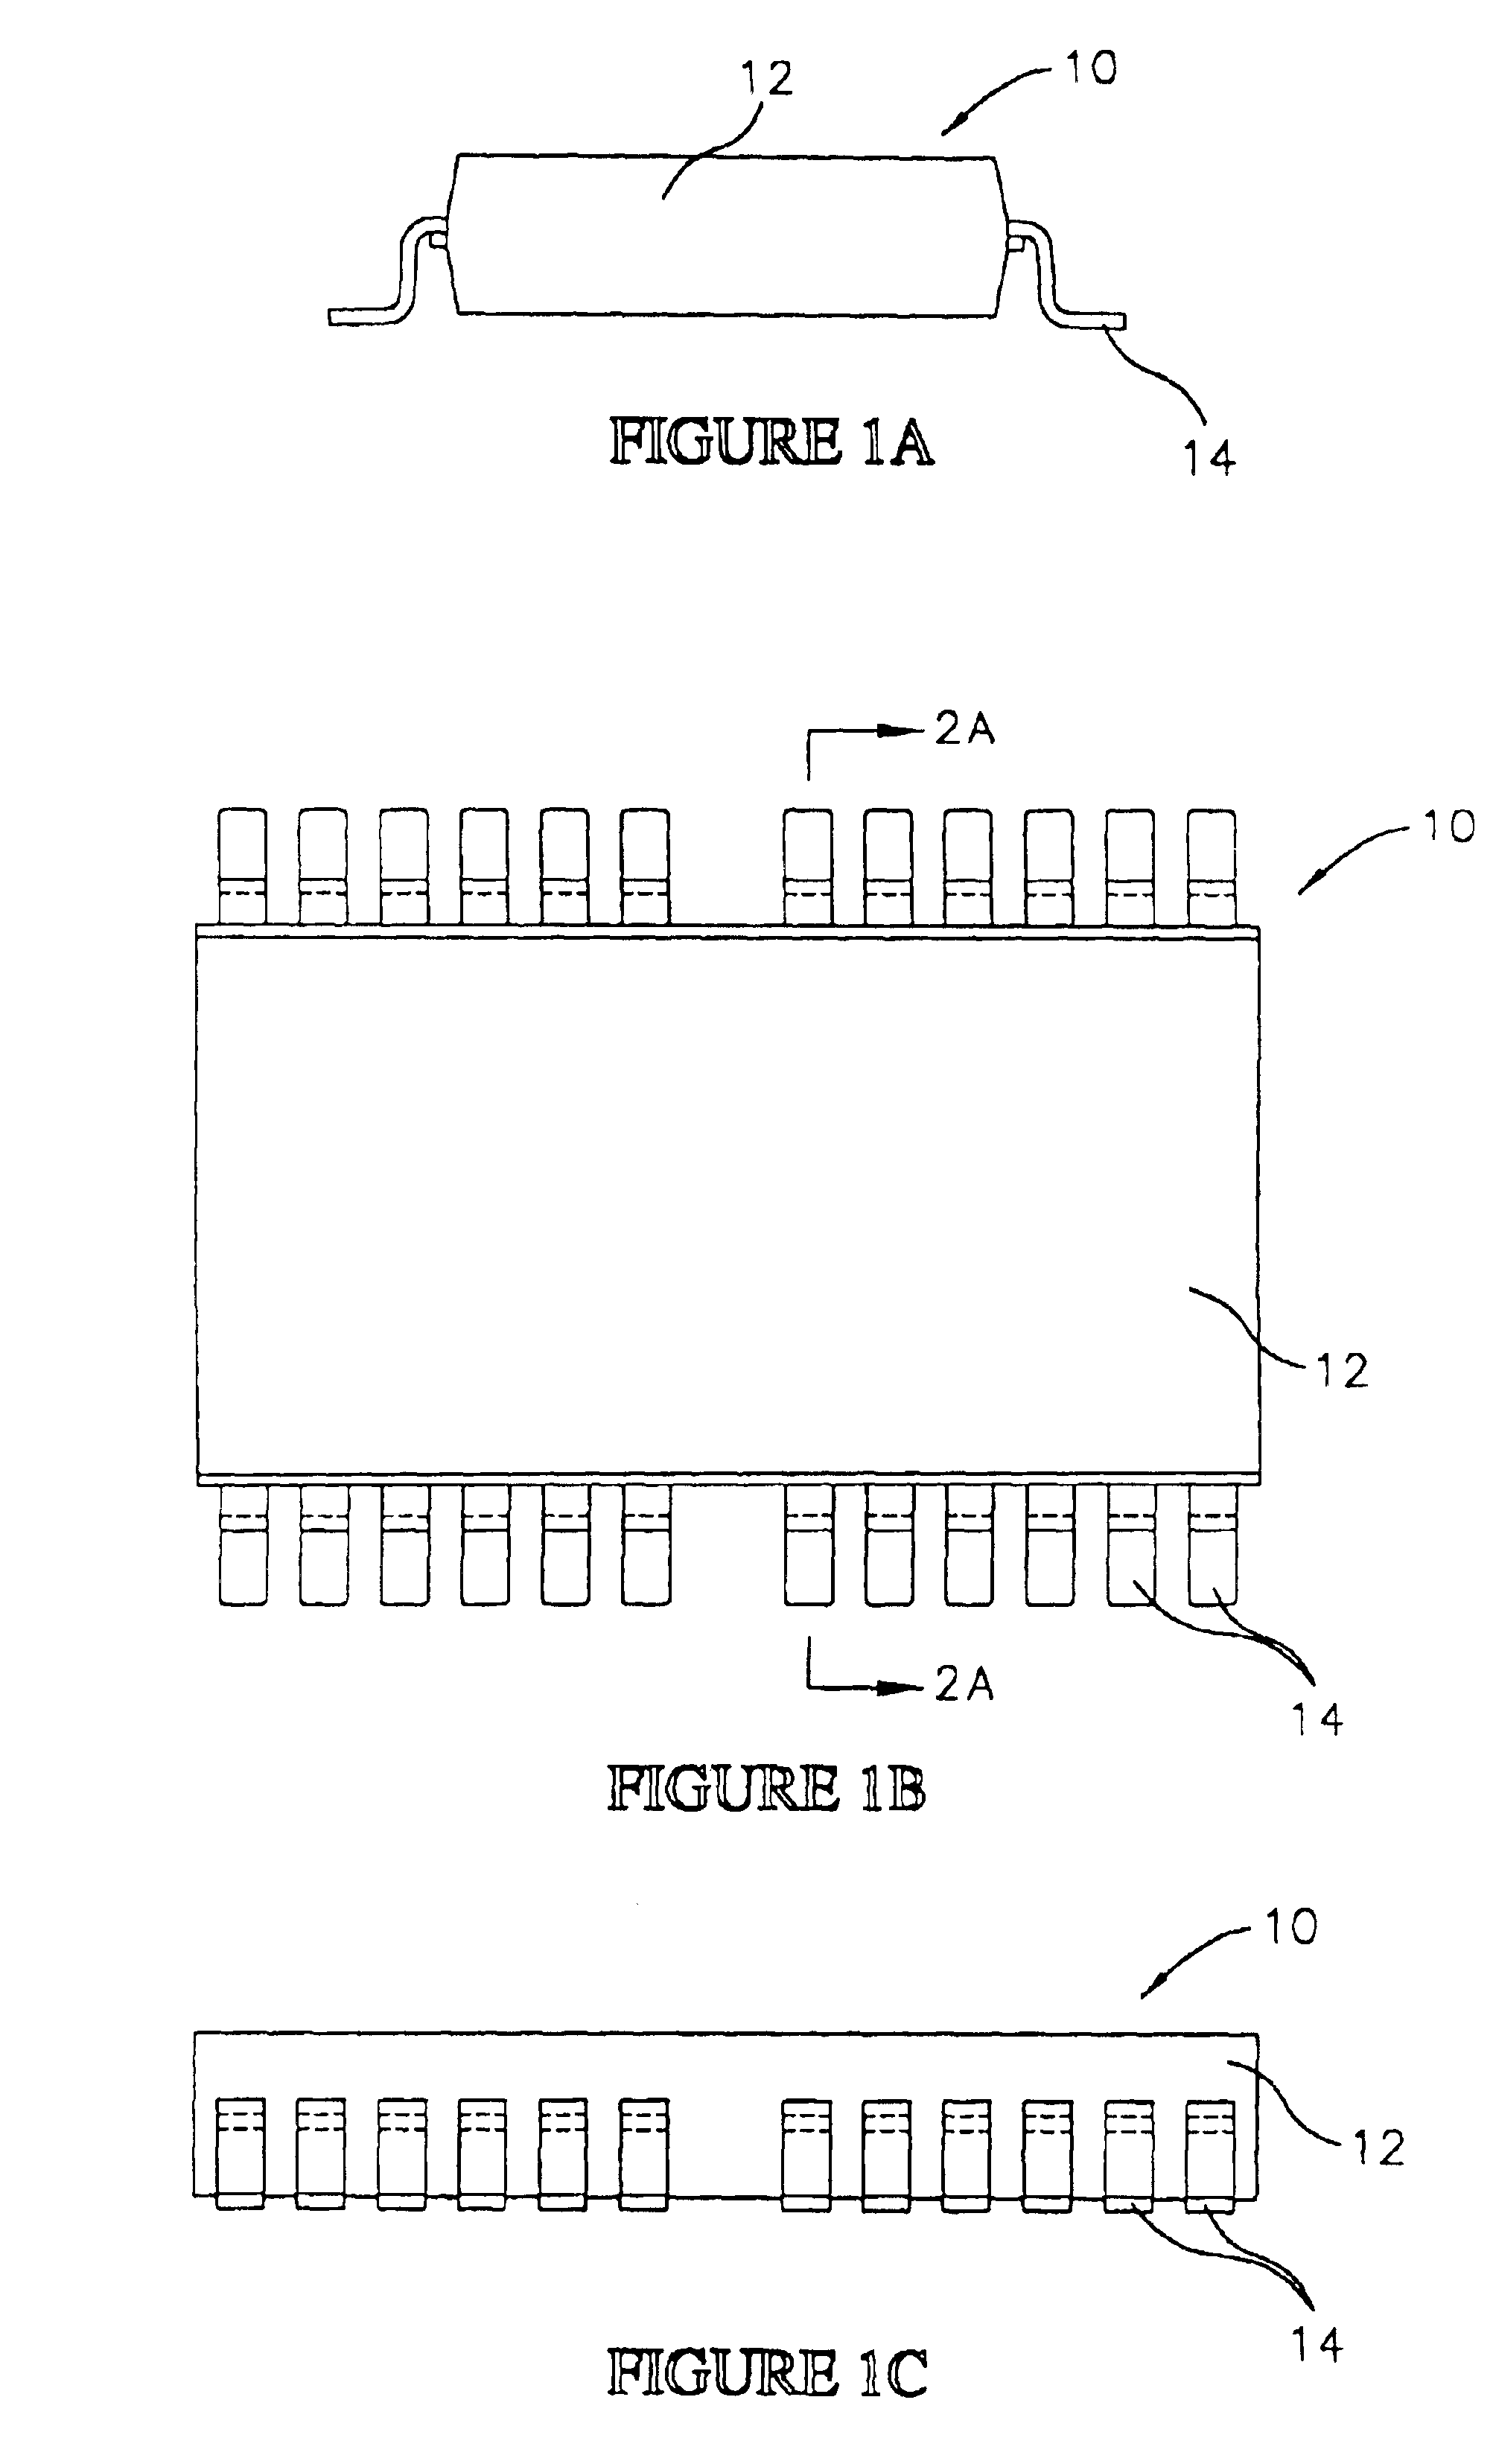 Method for fabricating semiconductor packages with stacked dice and leadframes